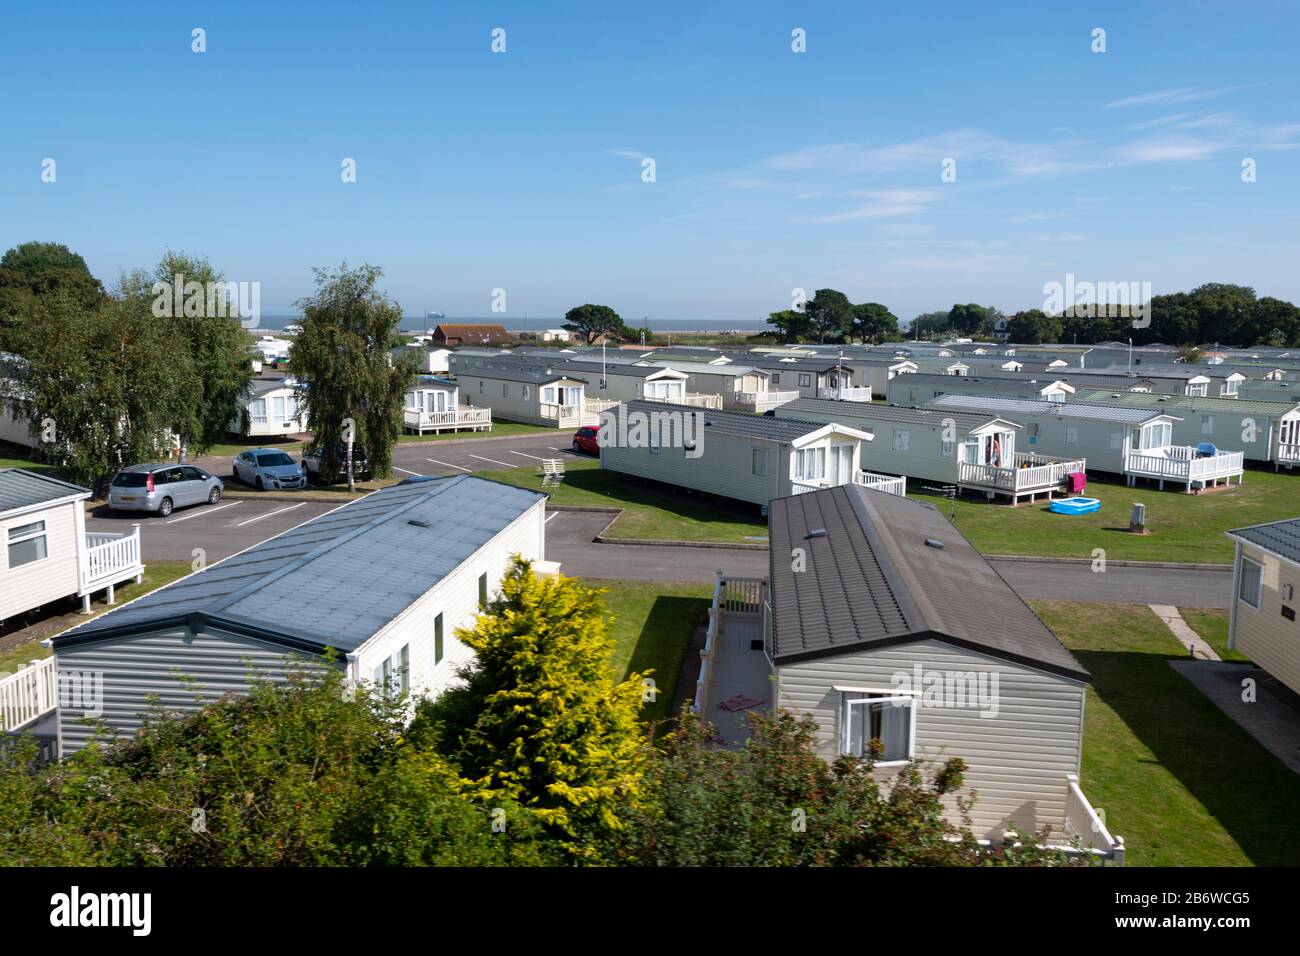 Caravans in Holiday Park at Blue Anchor, Minehead, Somerset, England Stock Photo